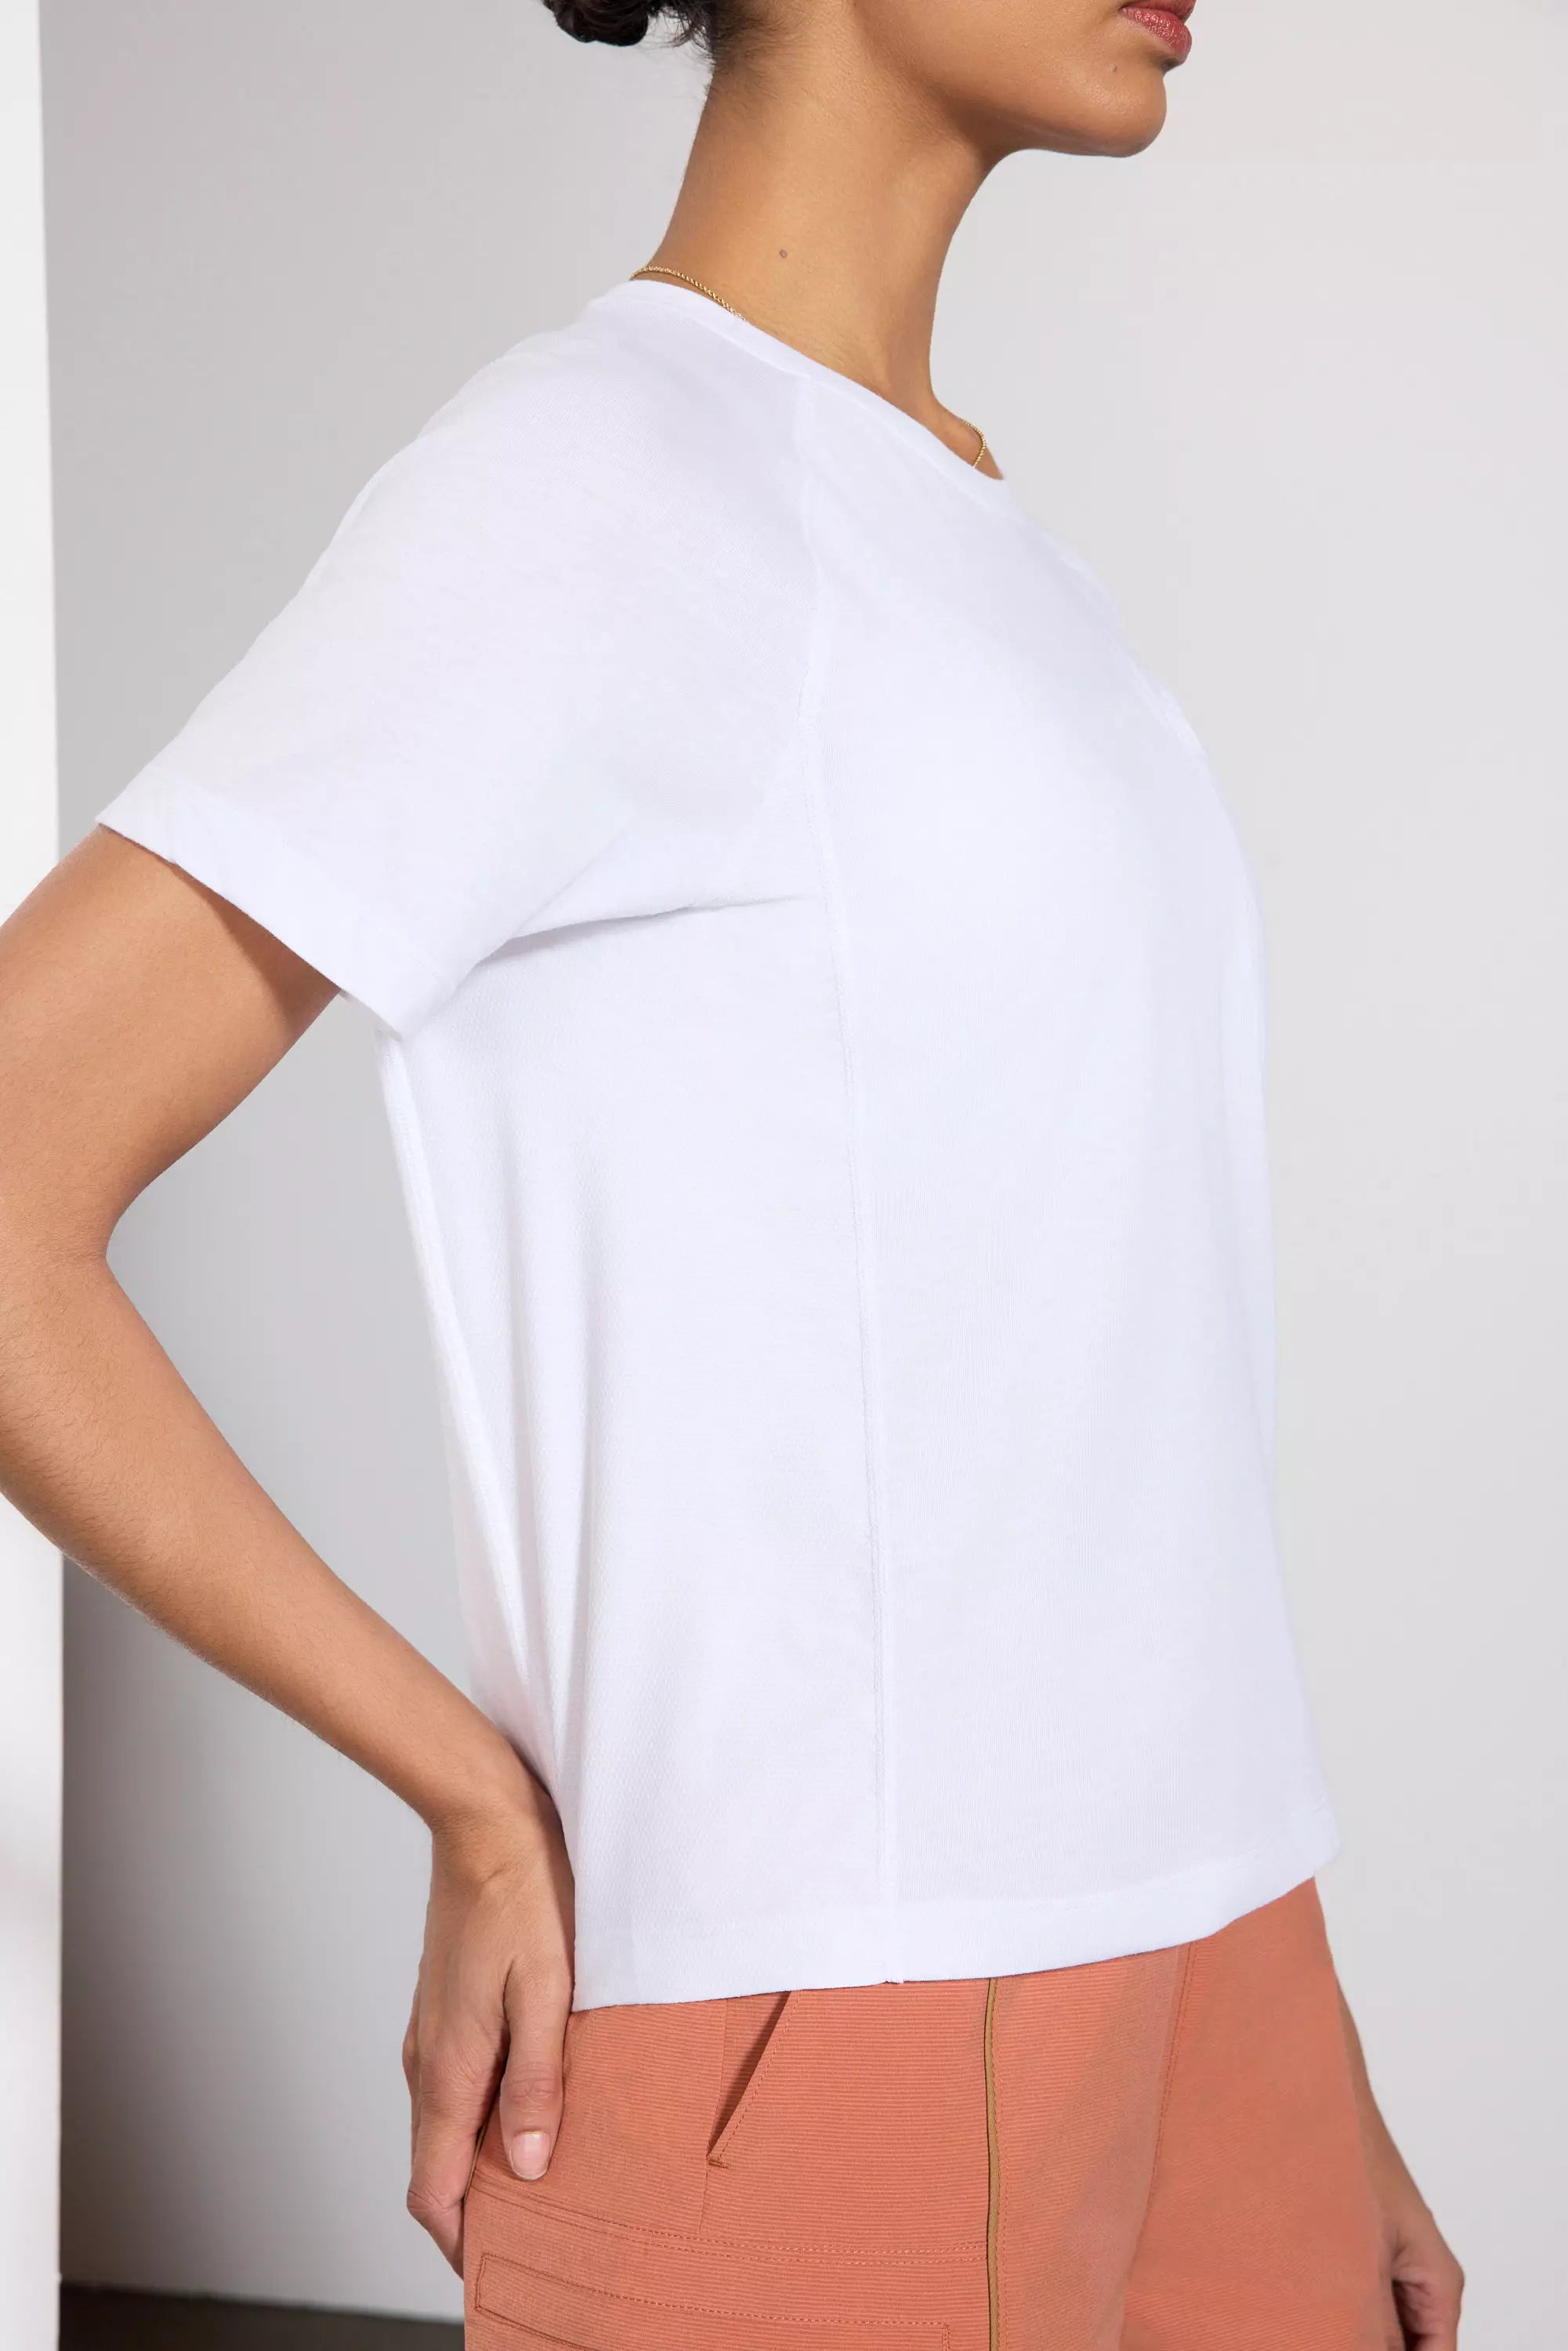 Achieve Mesh Panel T-Shirt with Chest Pocket